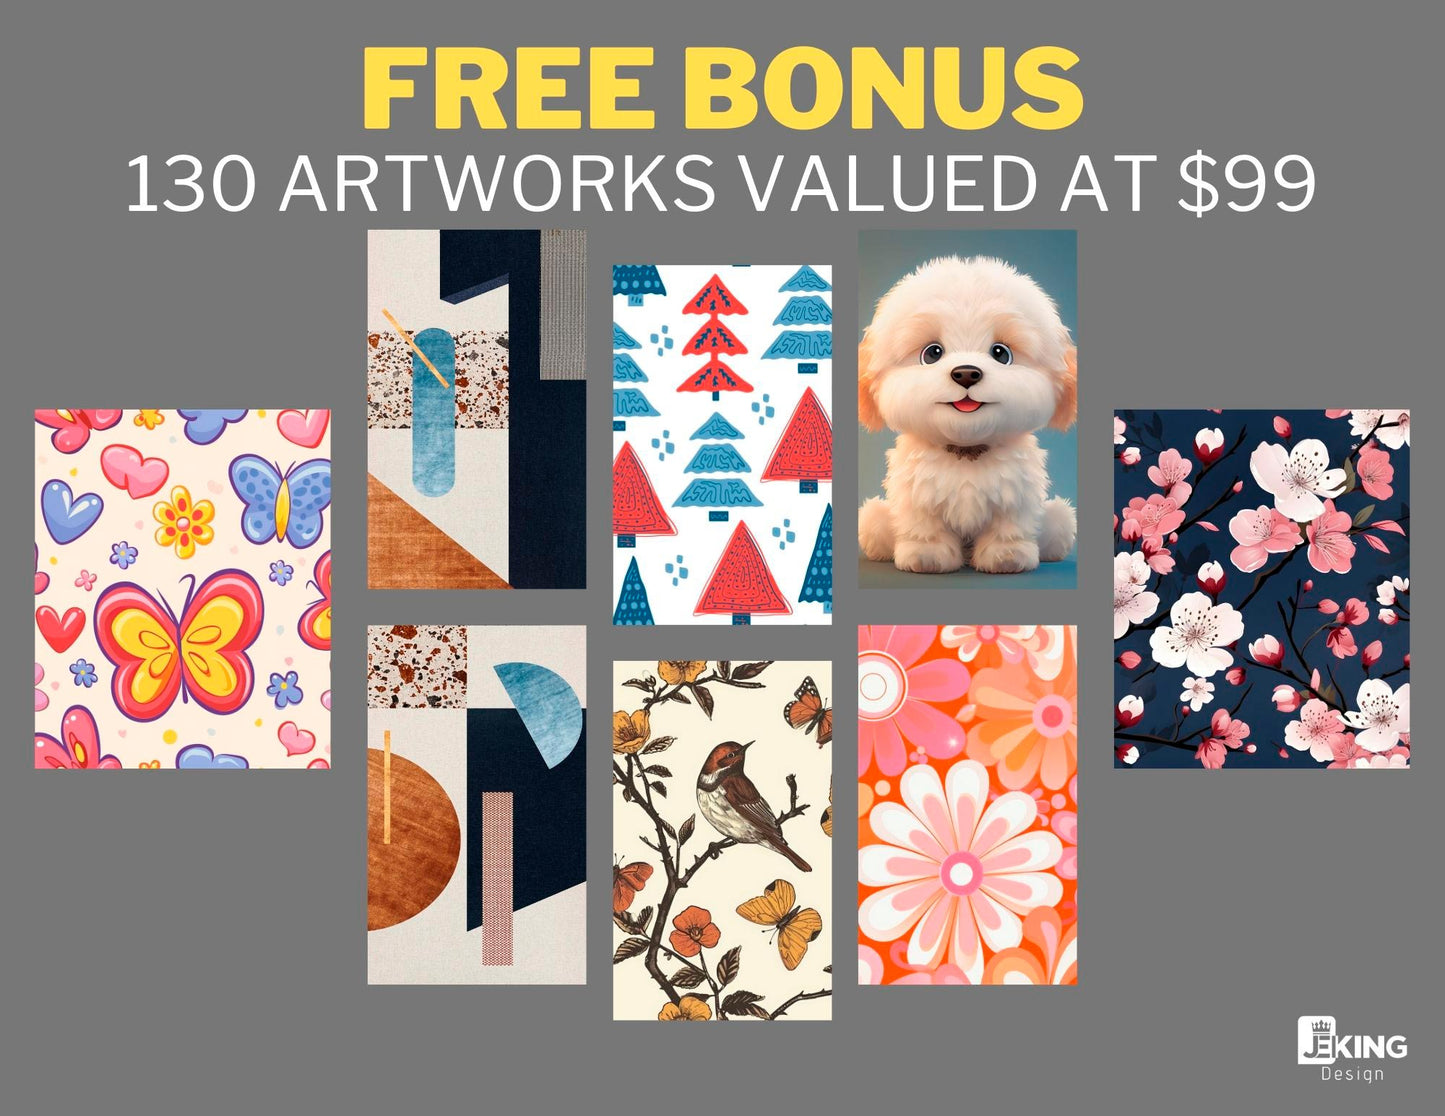 Harvest of Solitude + Free Bonus Valued at $99: Buy Two, Get One Free – Three Premium Digital Artworks for the Price of Two. High-Resolution PNG and PDF Downloads for Home and Office Decor